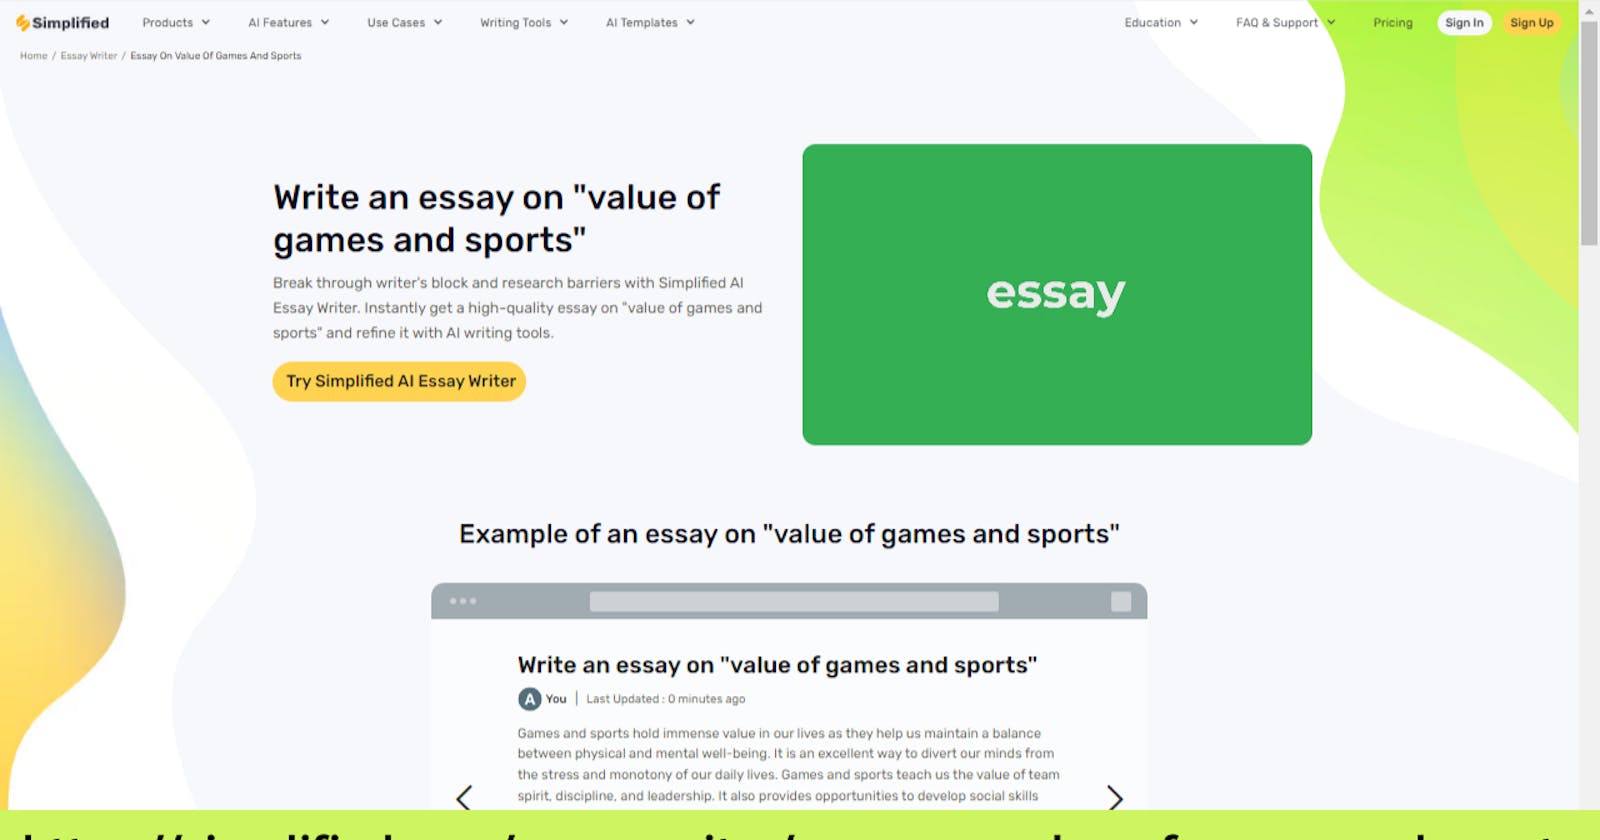 Enhance Well-being through Games and Sports with the Essay Writer Free Online